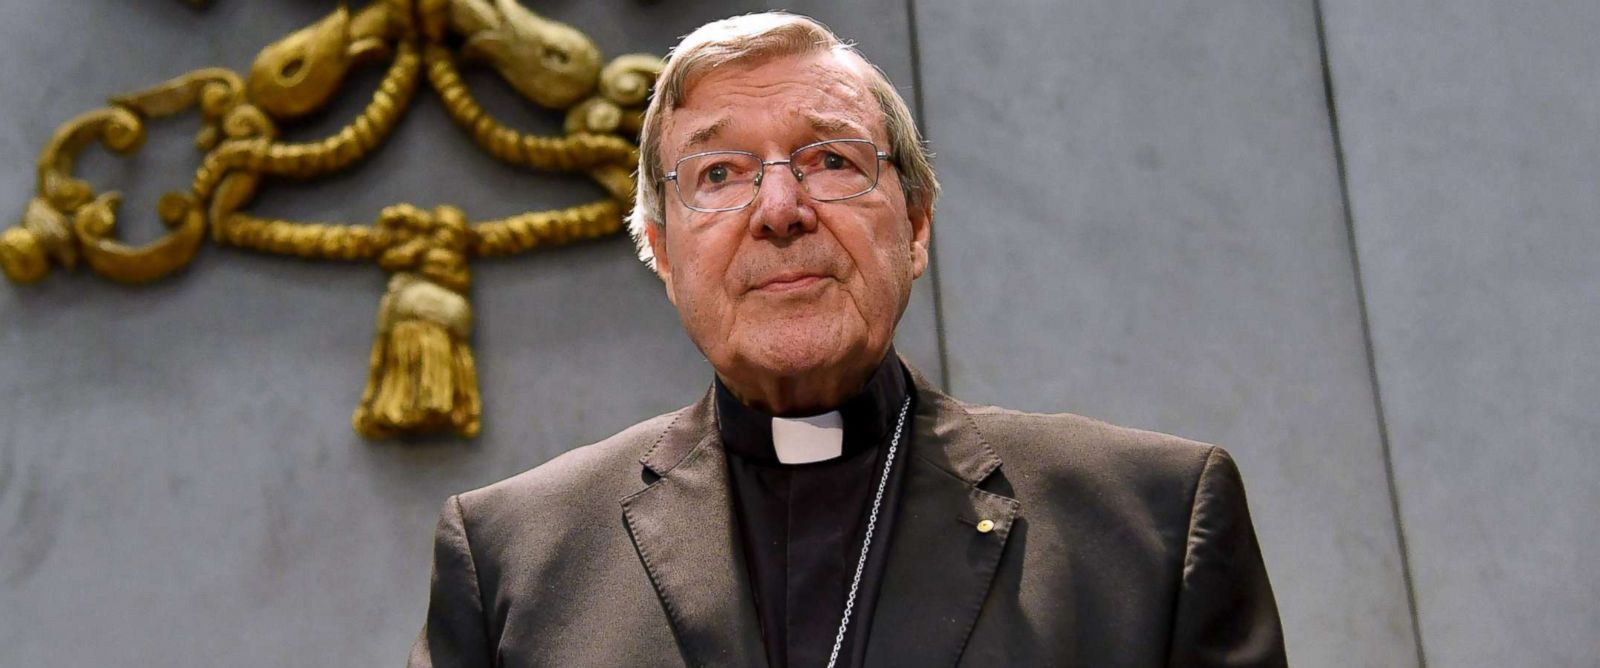 Pope’s Senior Advisor Facing Sex Offence Charges